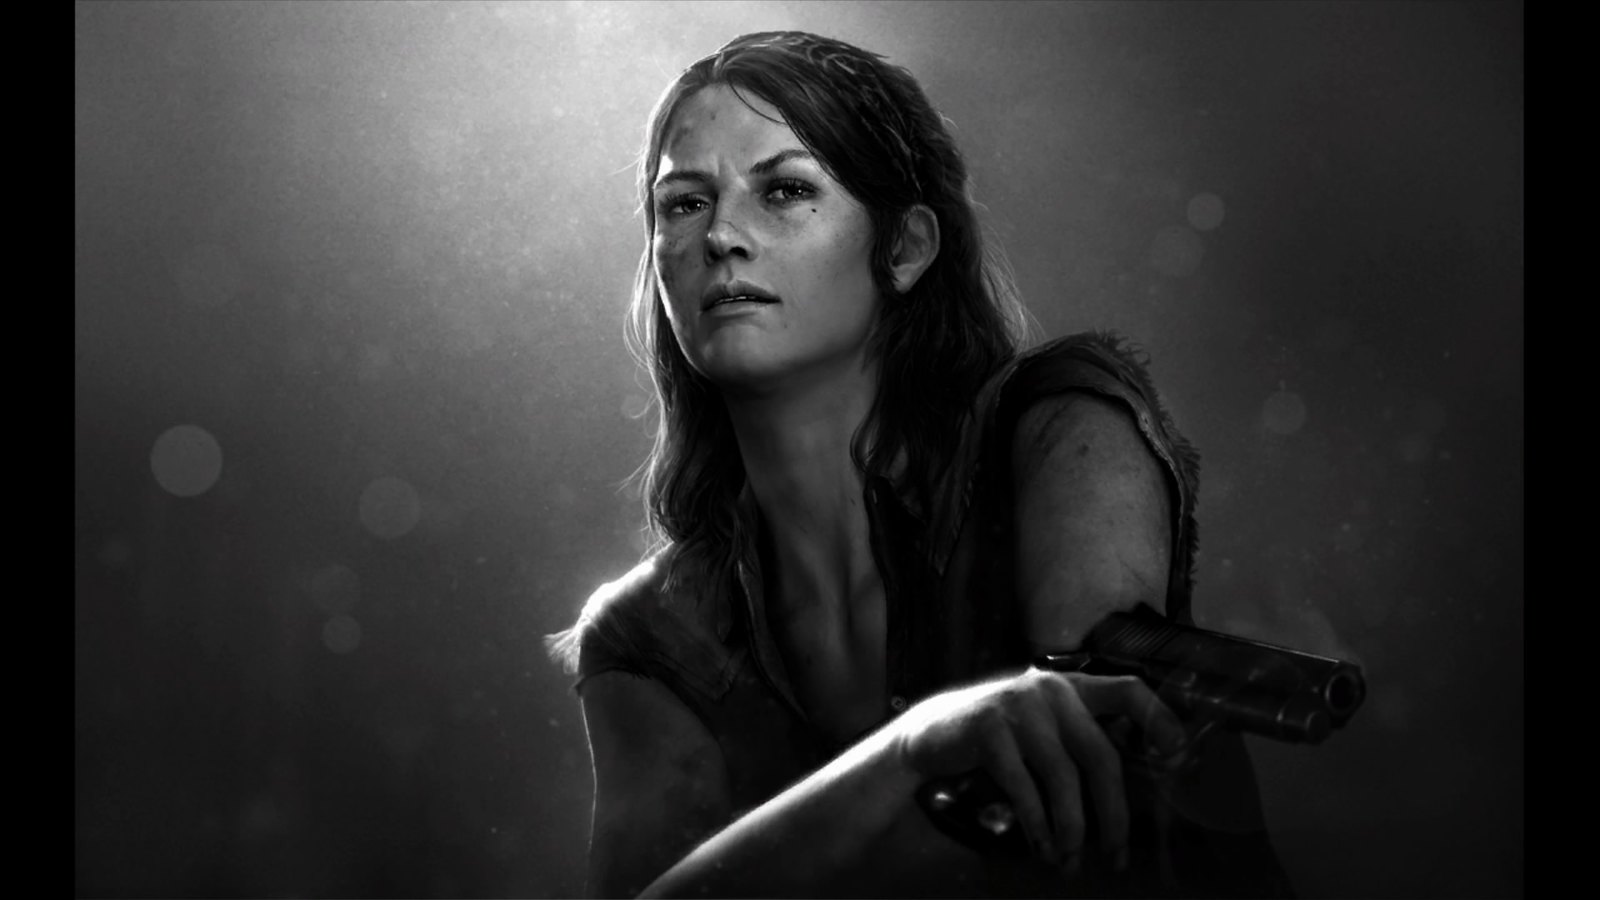 The Last of Us Wallpaper (Tess), The Last of Us Wallpaper